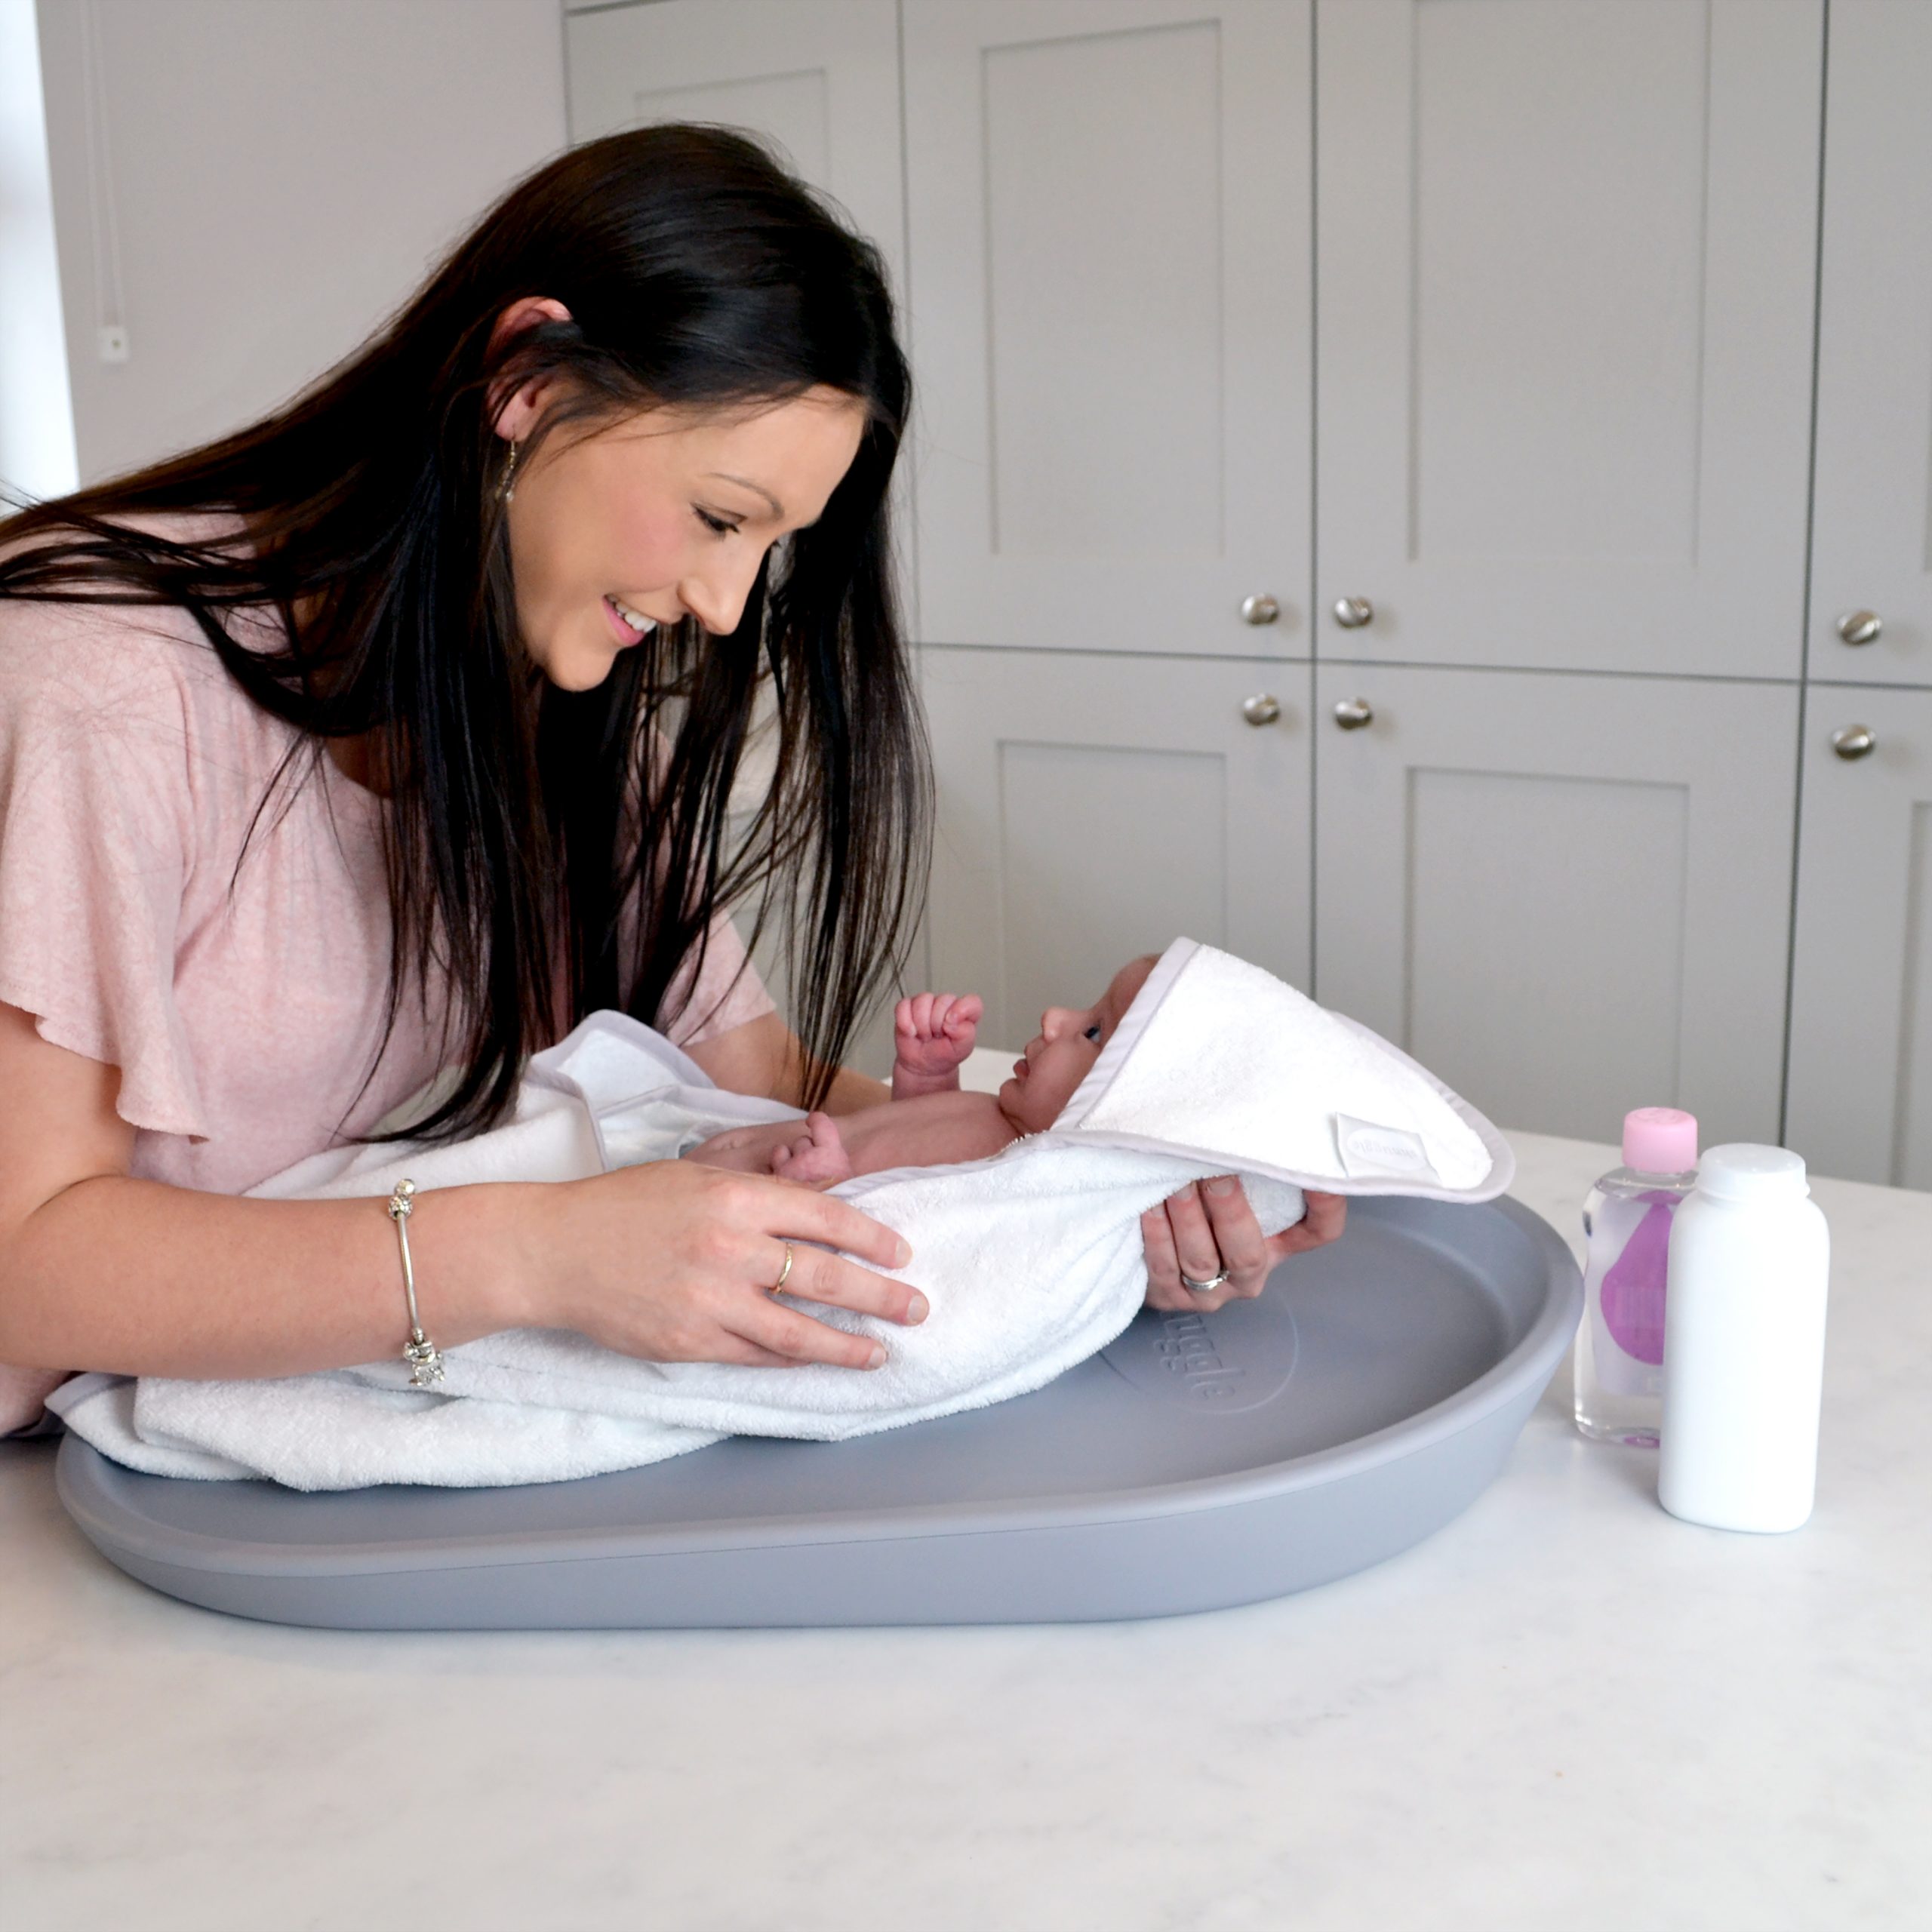 A woman changes her baby's nappy using the Shnuggle Squishy Changing Mat.